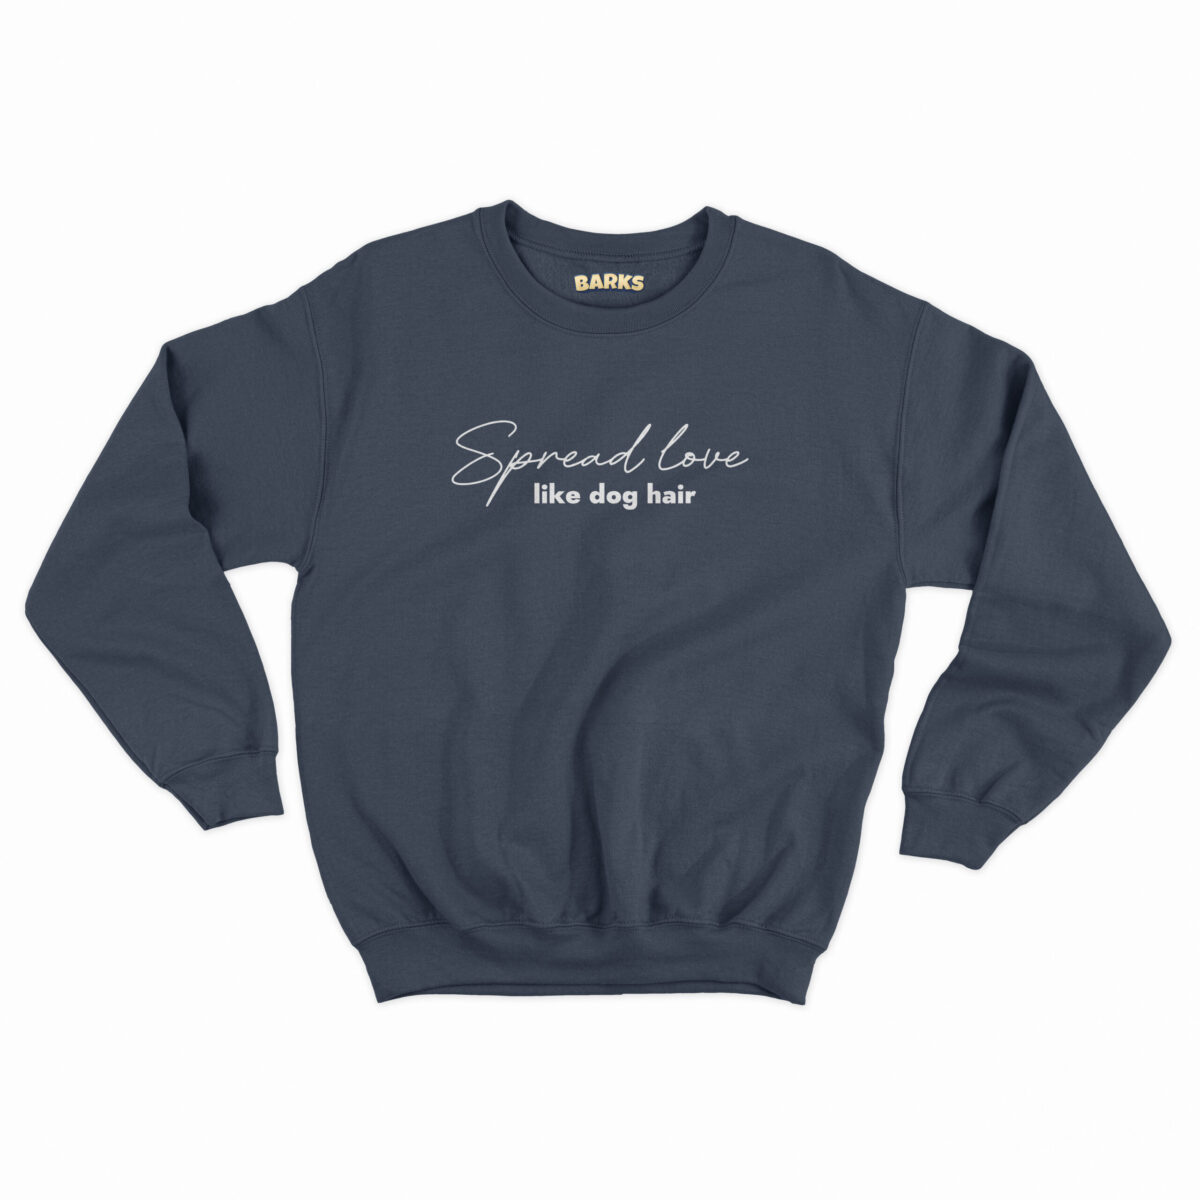 barks sweater spread love like dog hair french navy scaled